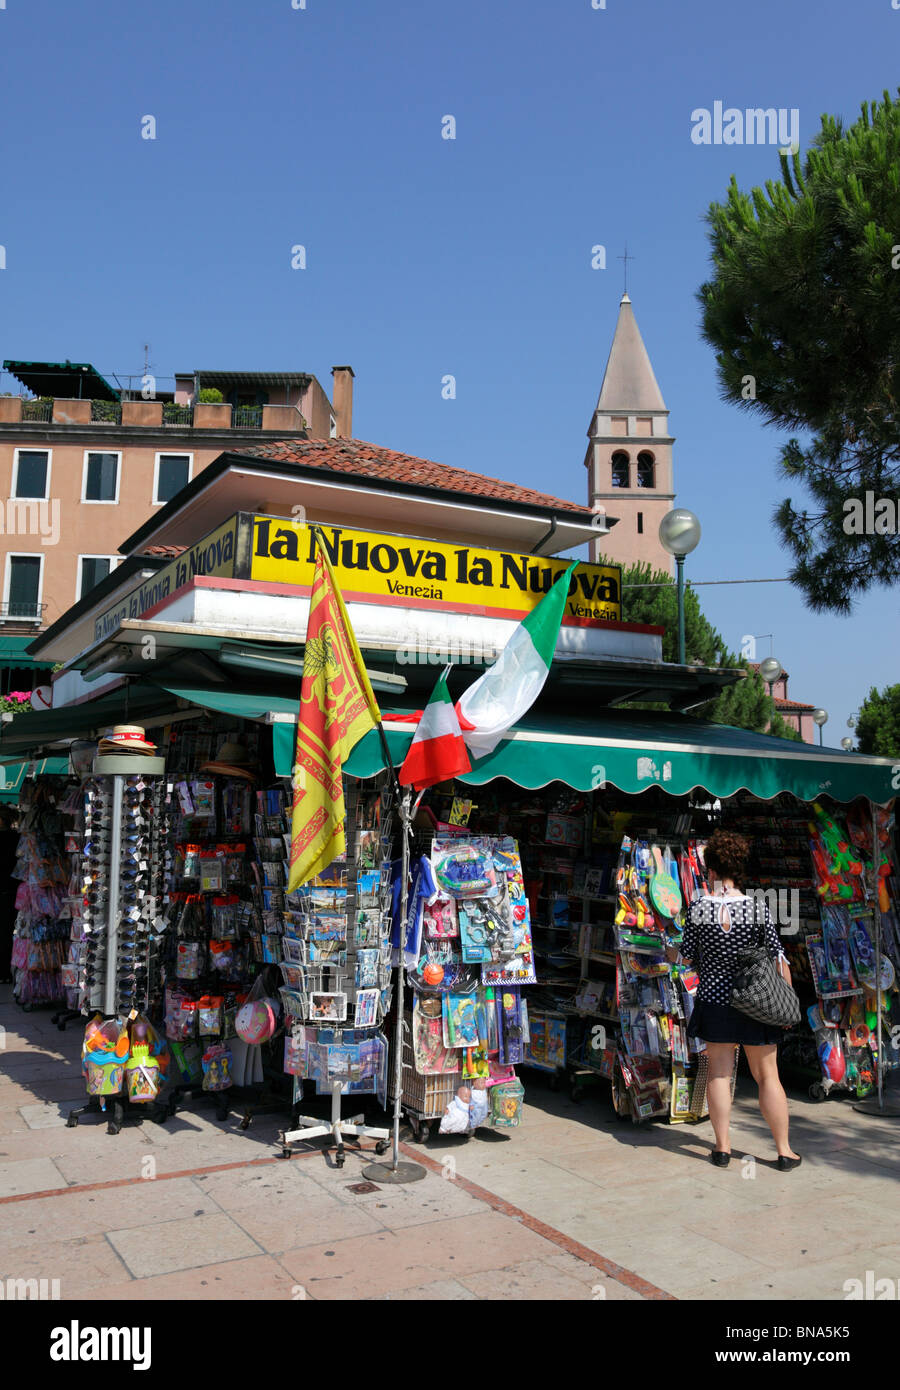 Popular tourist news agent selling beach and holiday related goods on Gran Viale Santa Maria Elisabetta Lido Island Venice Italy Stock Photo